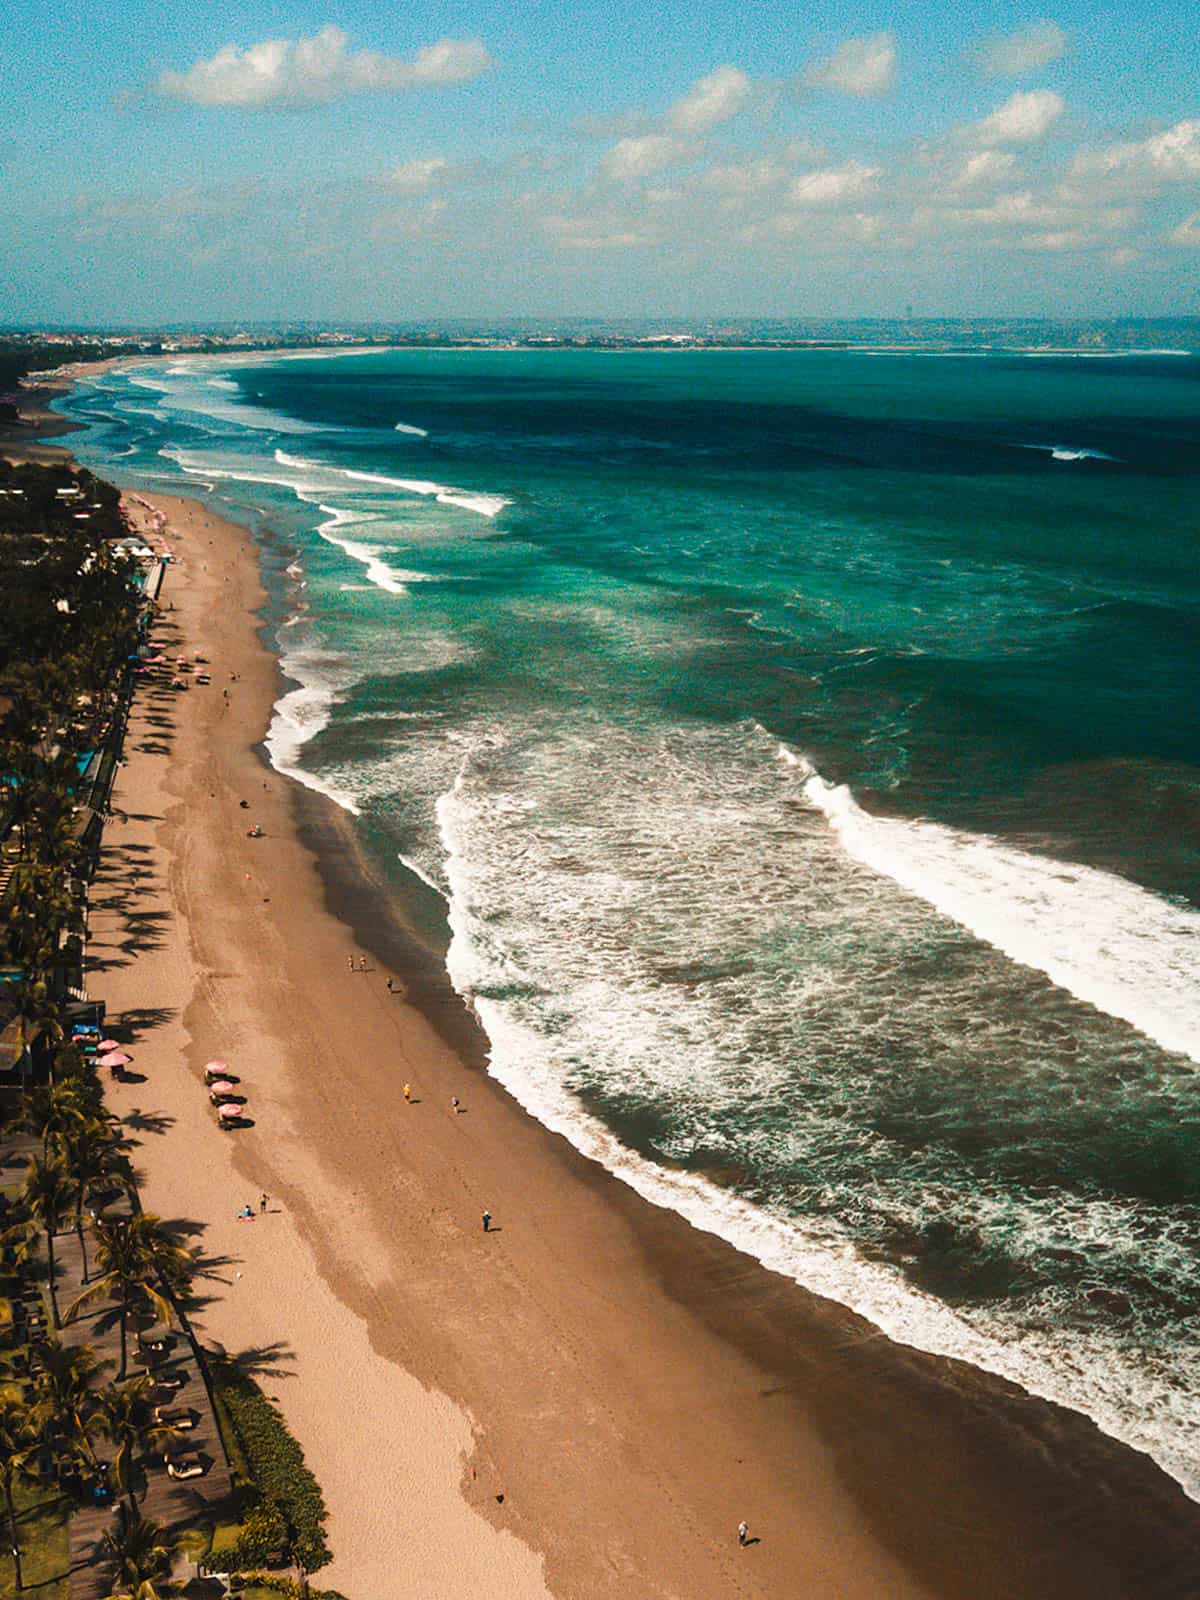 Aerial view of a beach in Bali, Indonesia